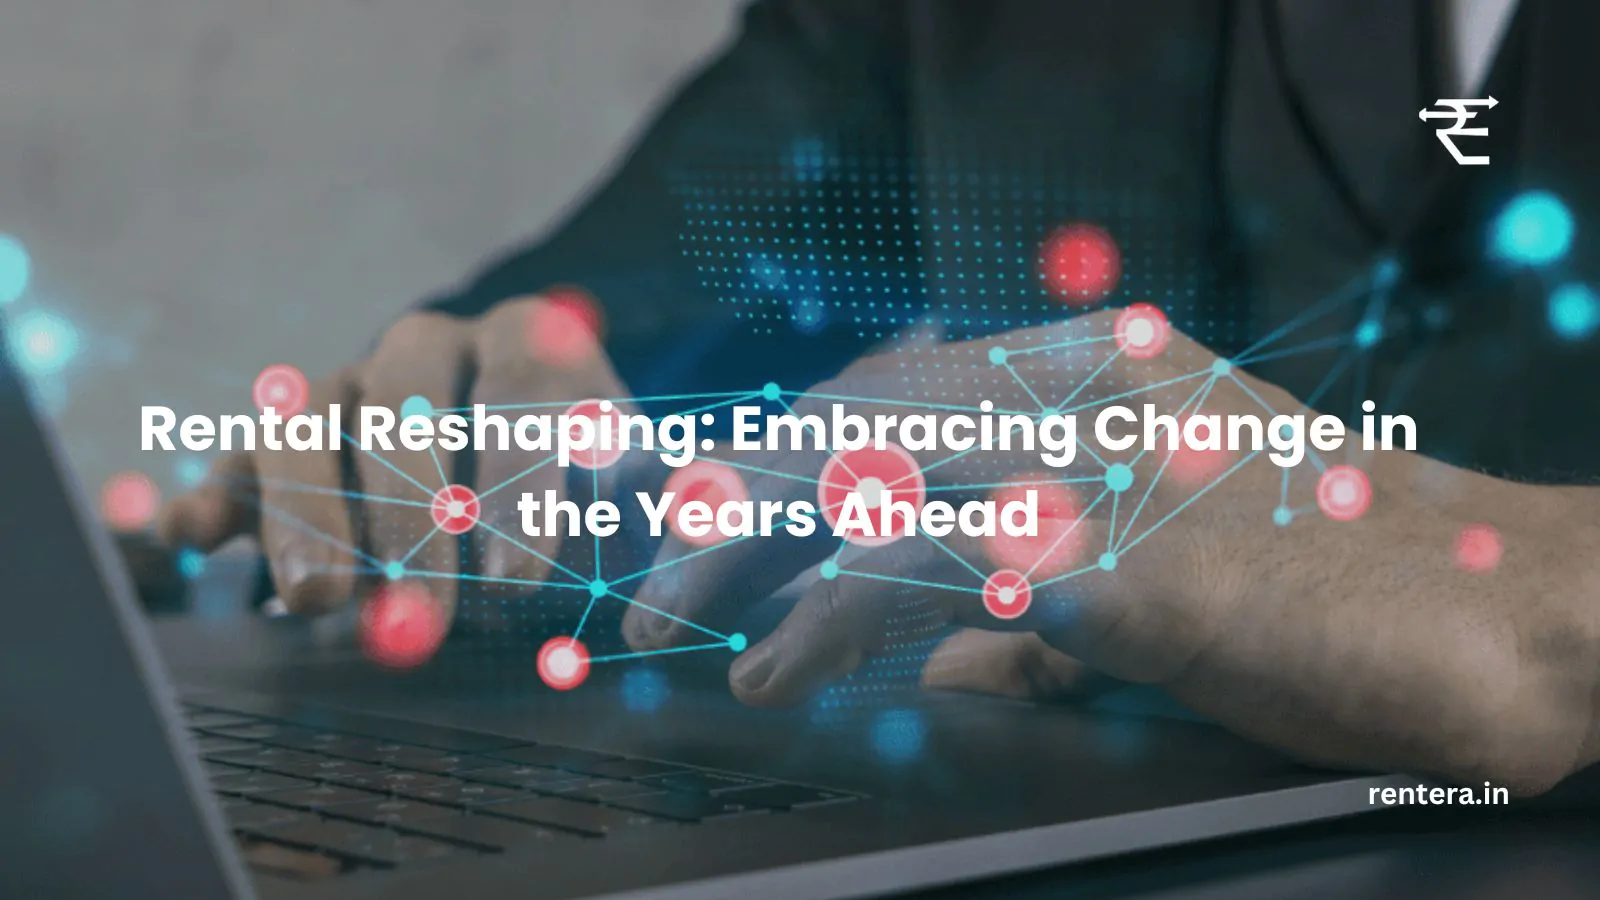 Rental Reshaping: Embracing Change in the Years Ahead